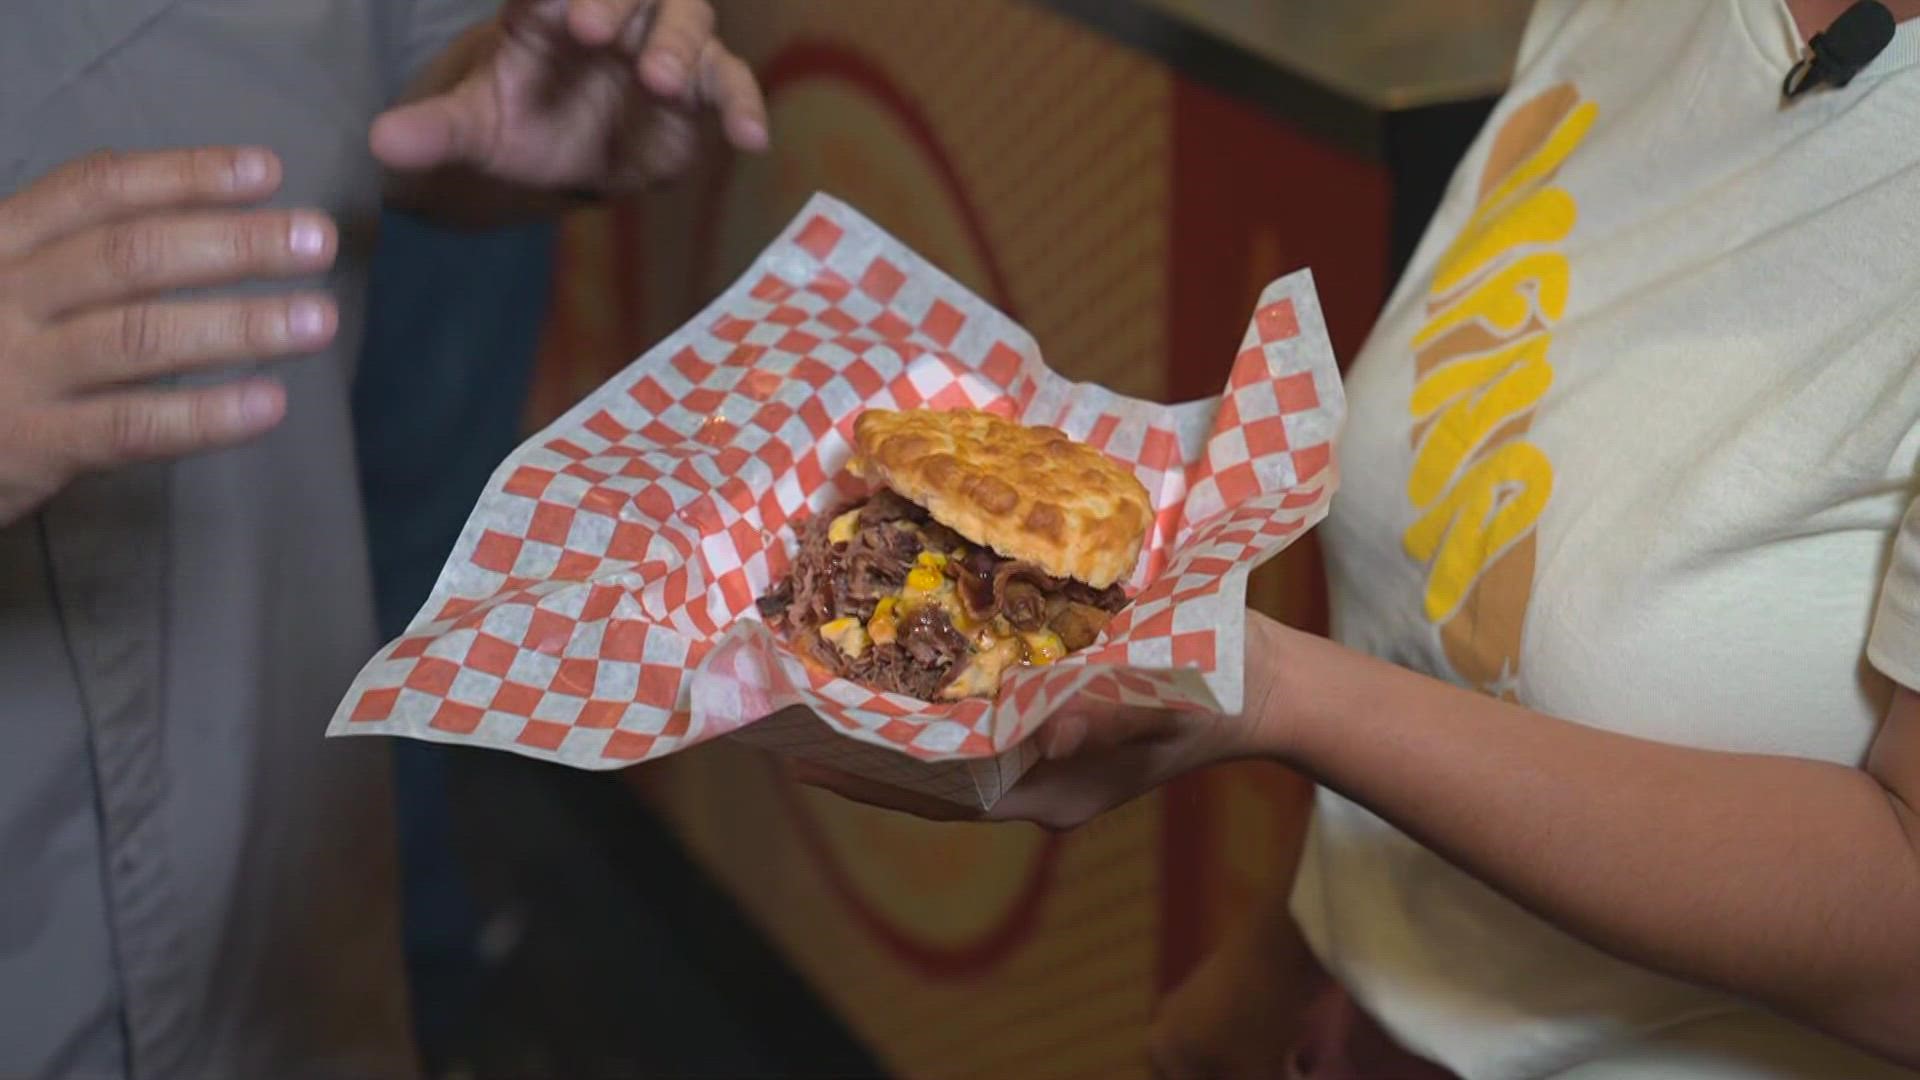 Visitors to the State Fair have always been drawn in by the food. This year is no exception.